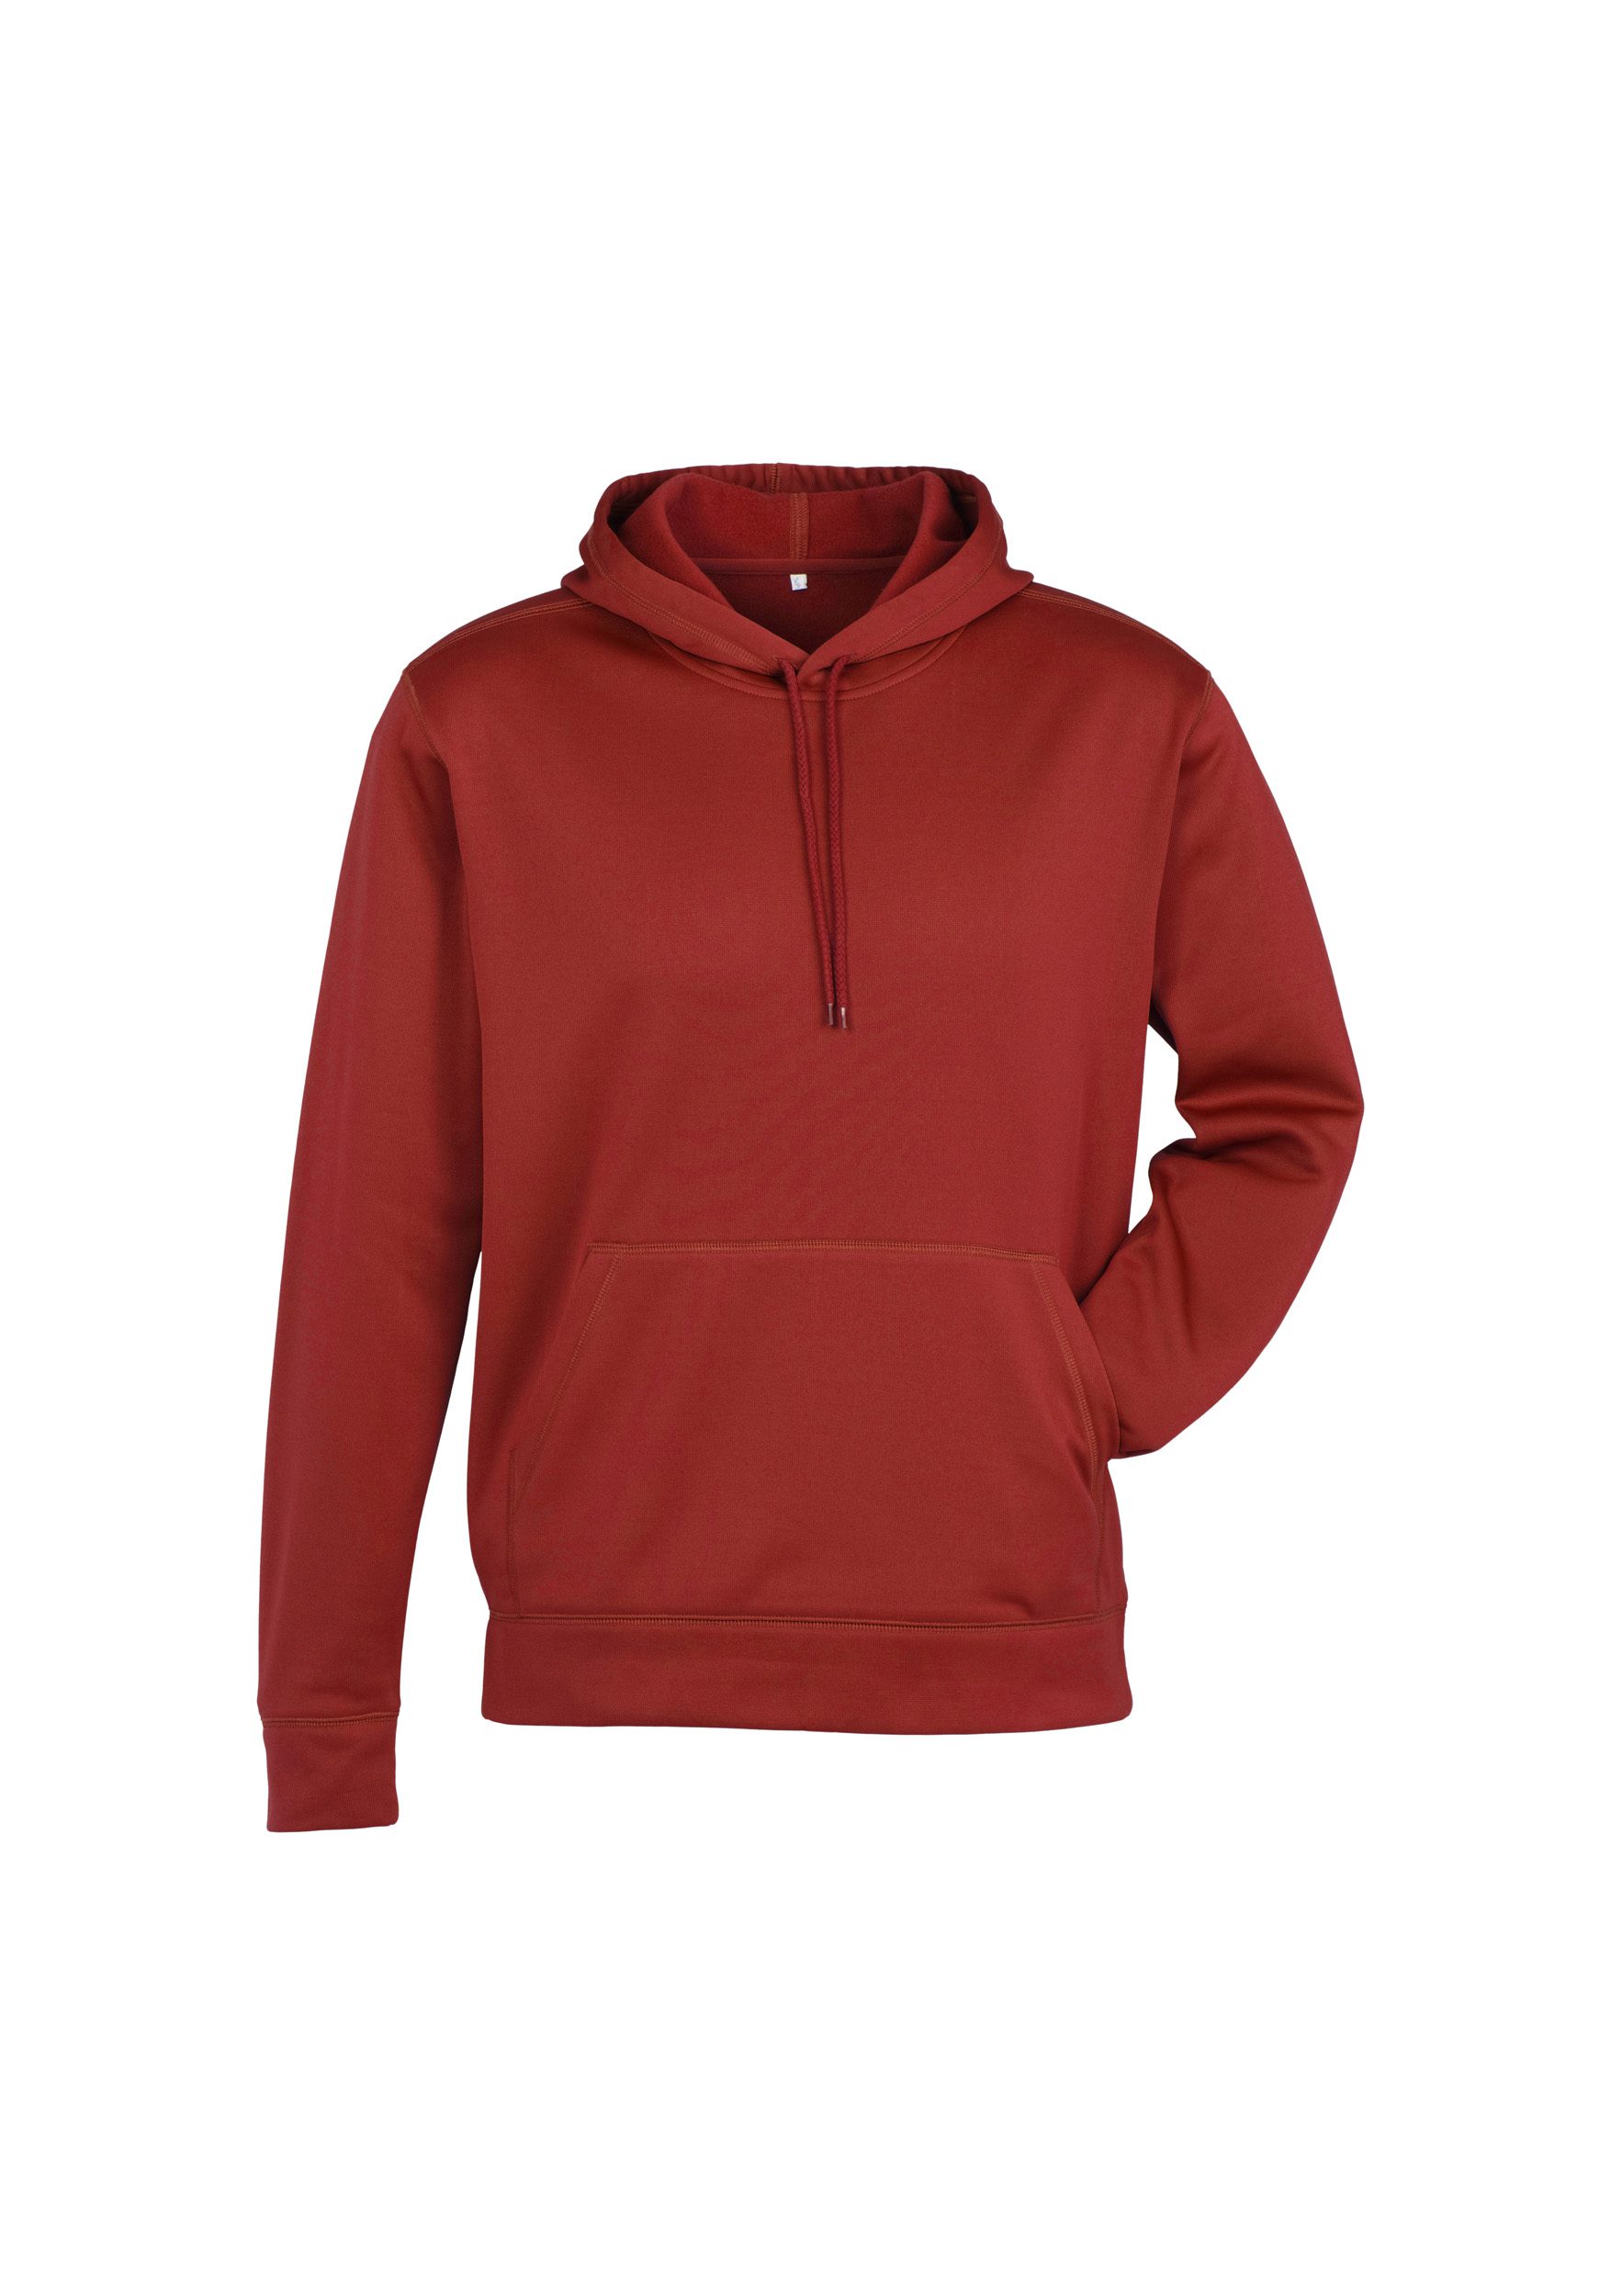 Biz Collection Men's Hype Pull-On Hoodie #SW239ML Red